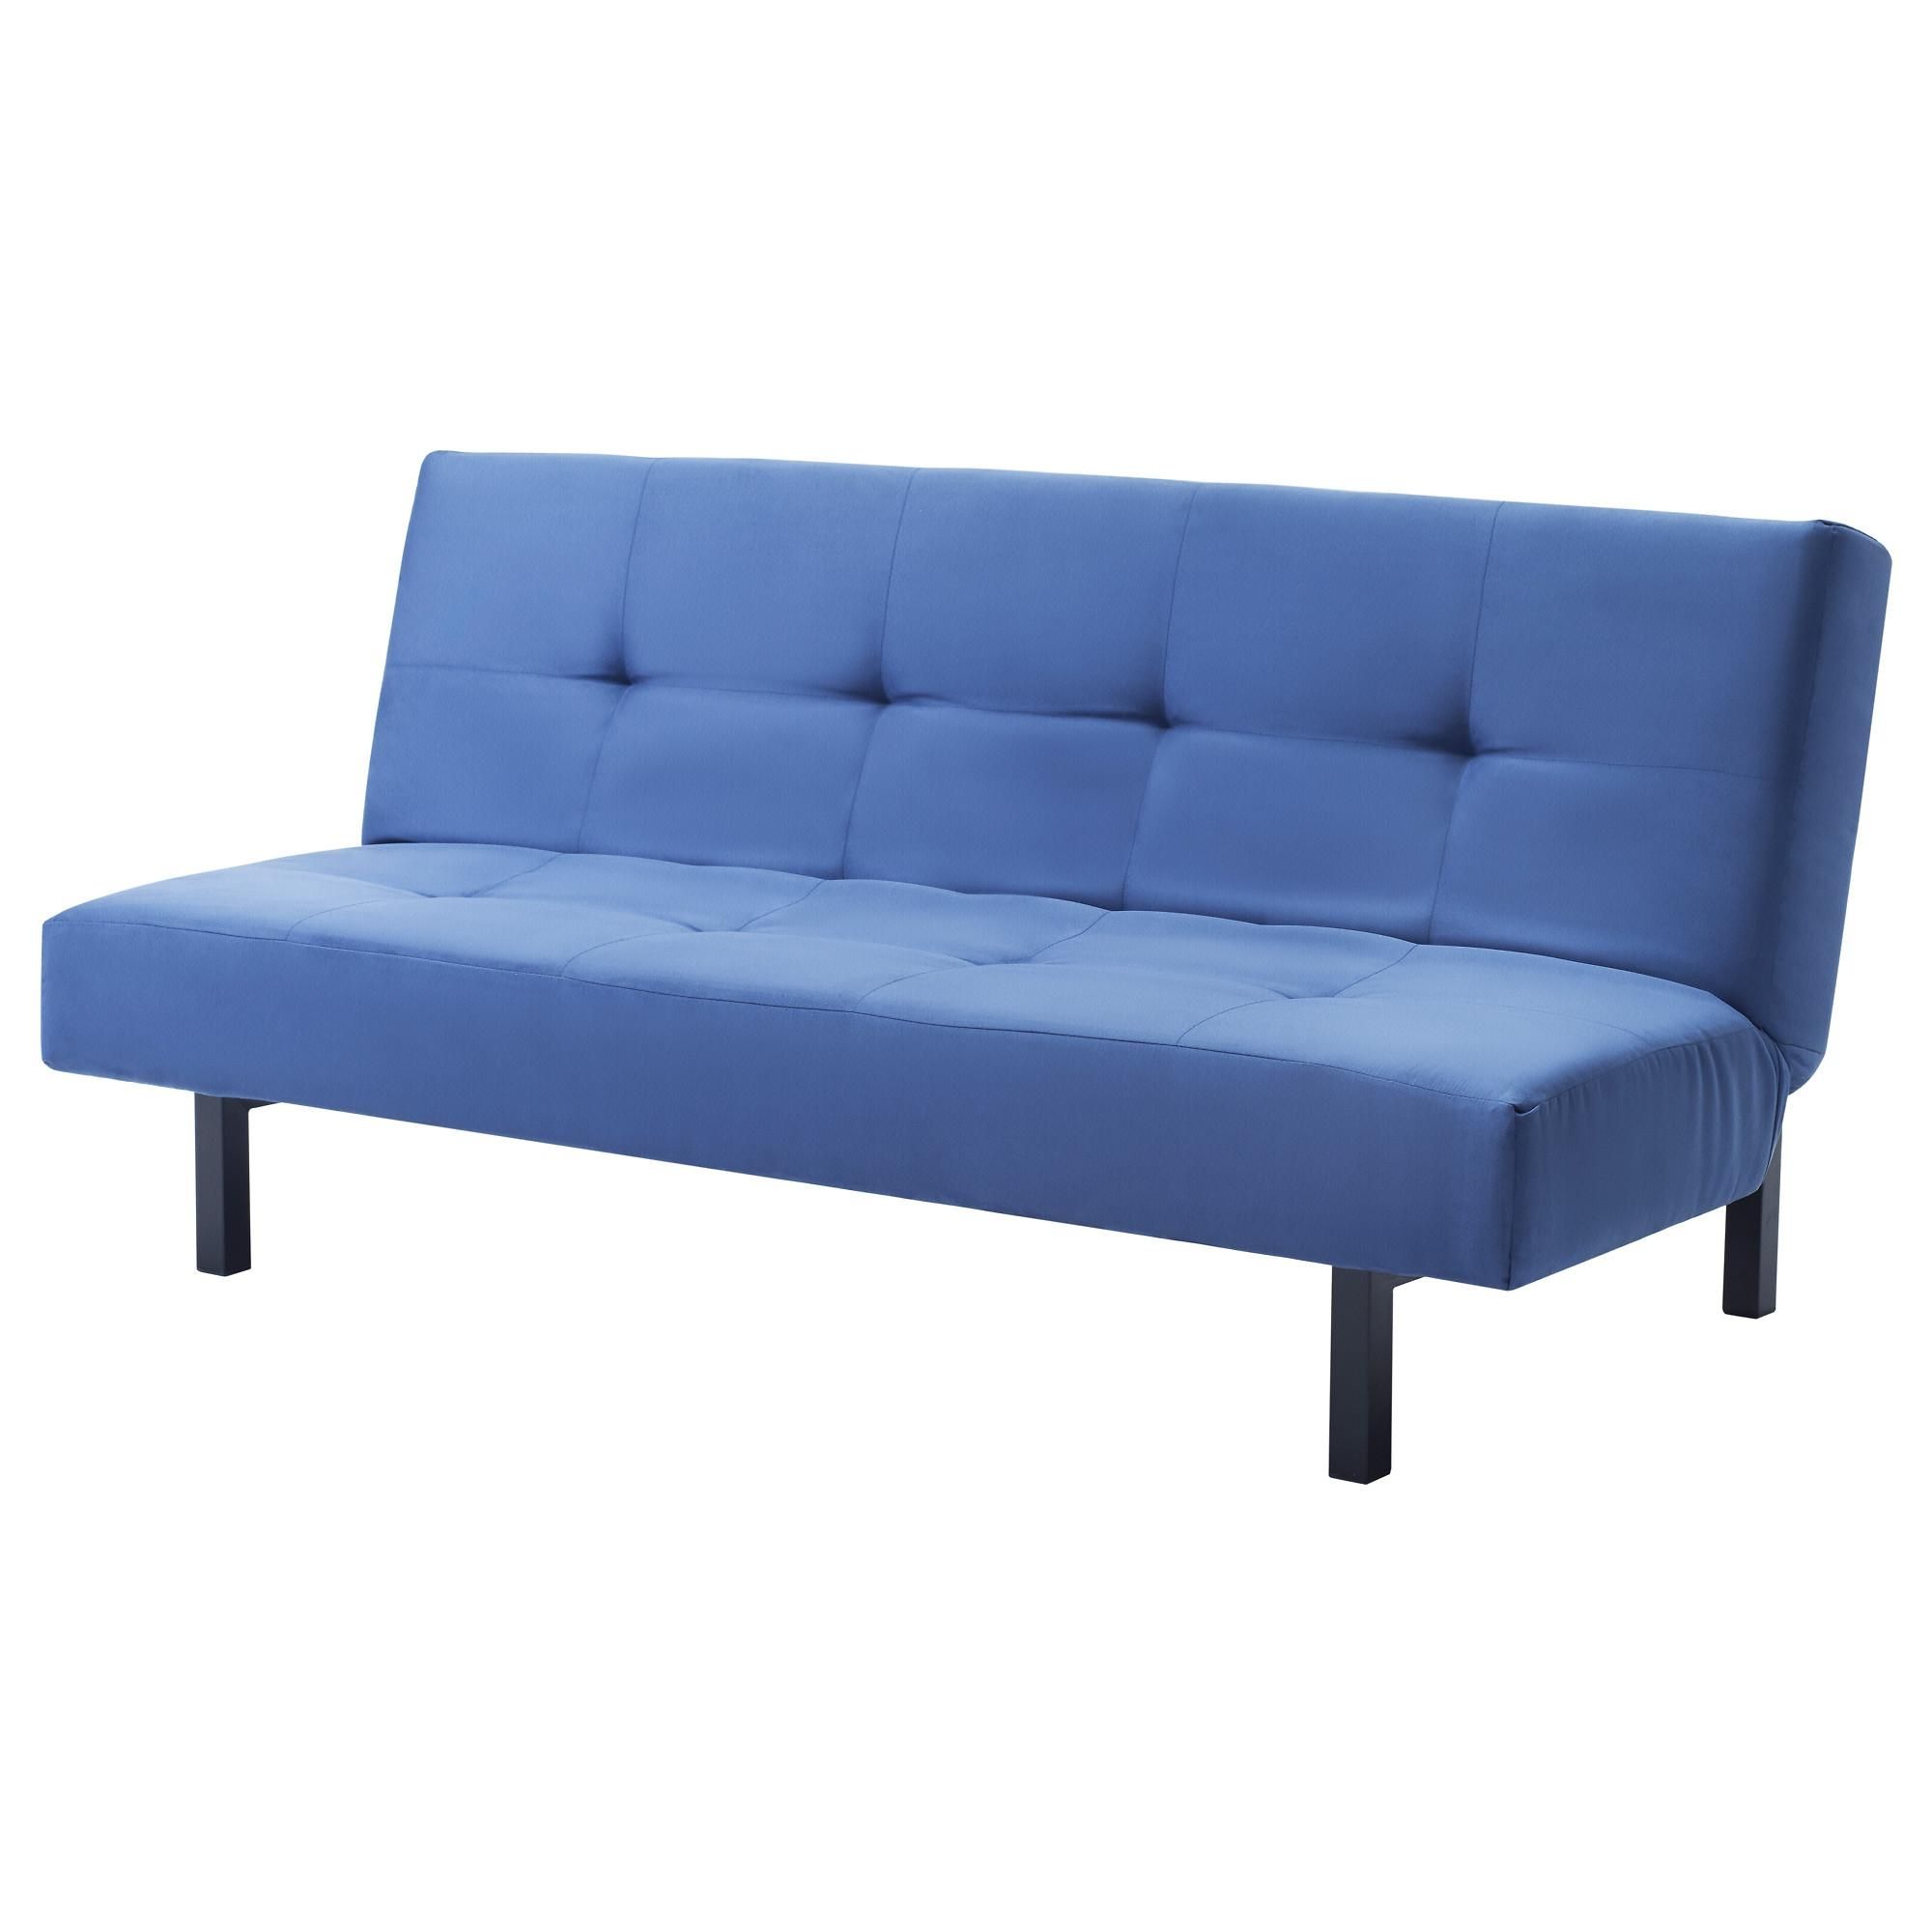 Furniture: Best Choice Solsta Sofa Bed For Your Living Room With Regard To Ikea Loveseat Sleeper Sofas (View 13 of 20)